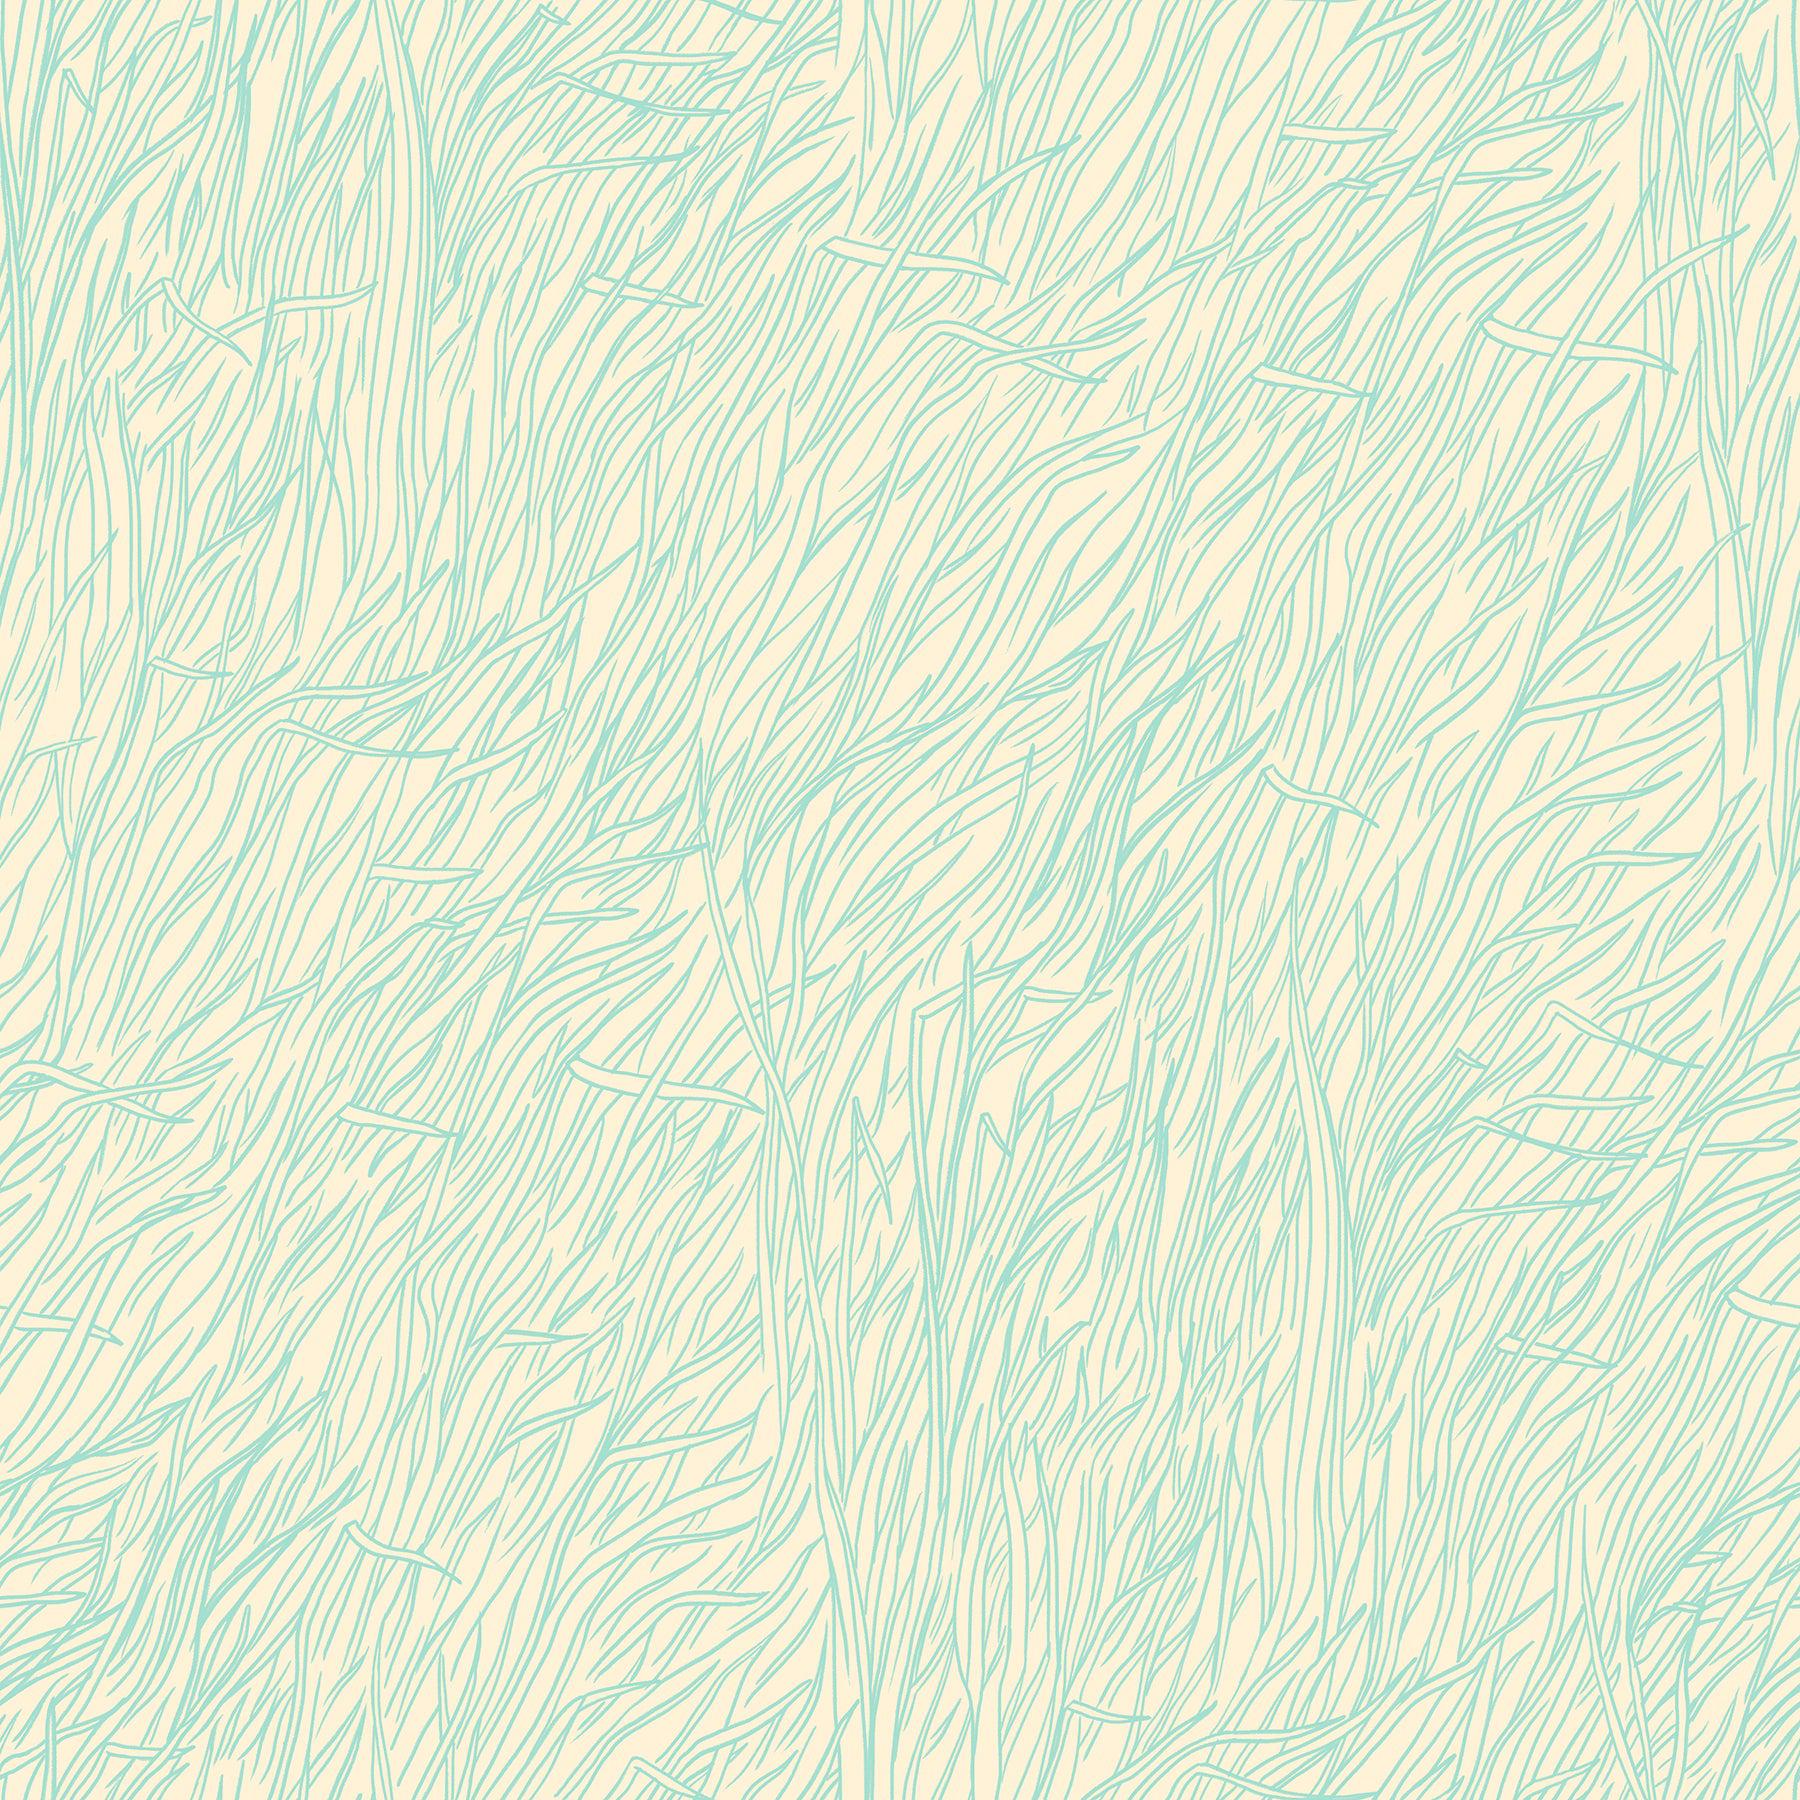 Ruby Star Society-Whisper Frost-fabric-gather here online